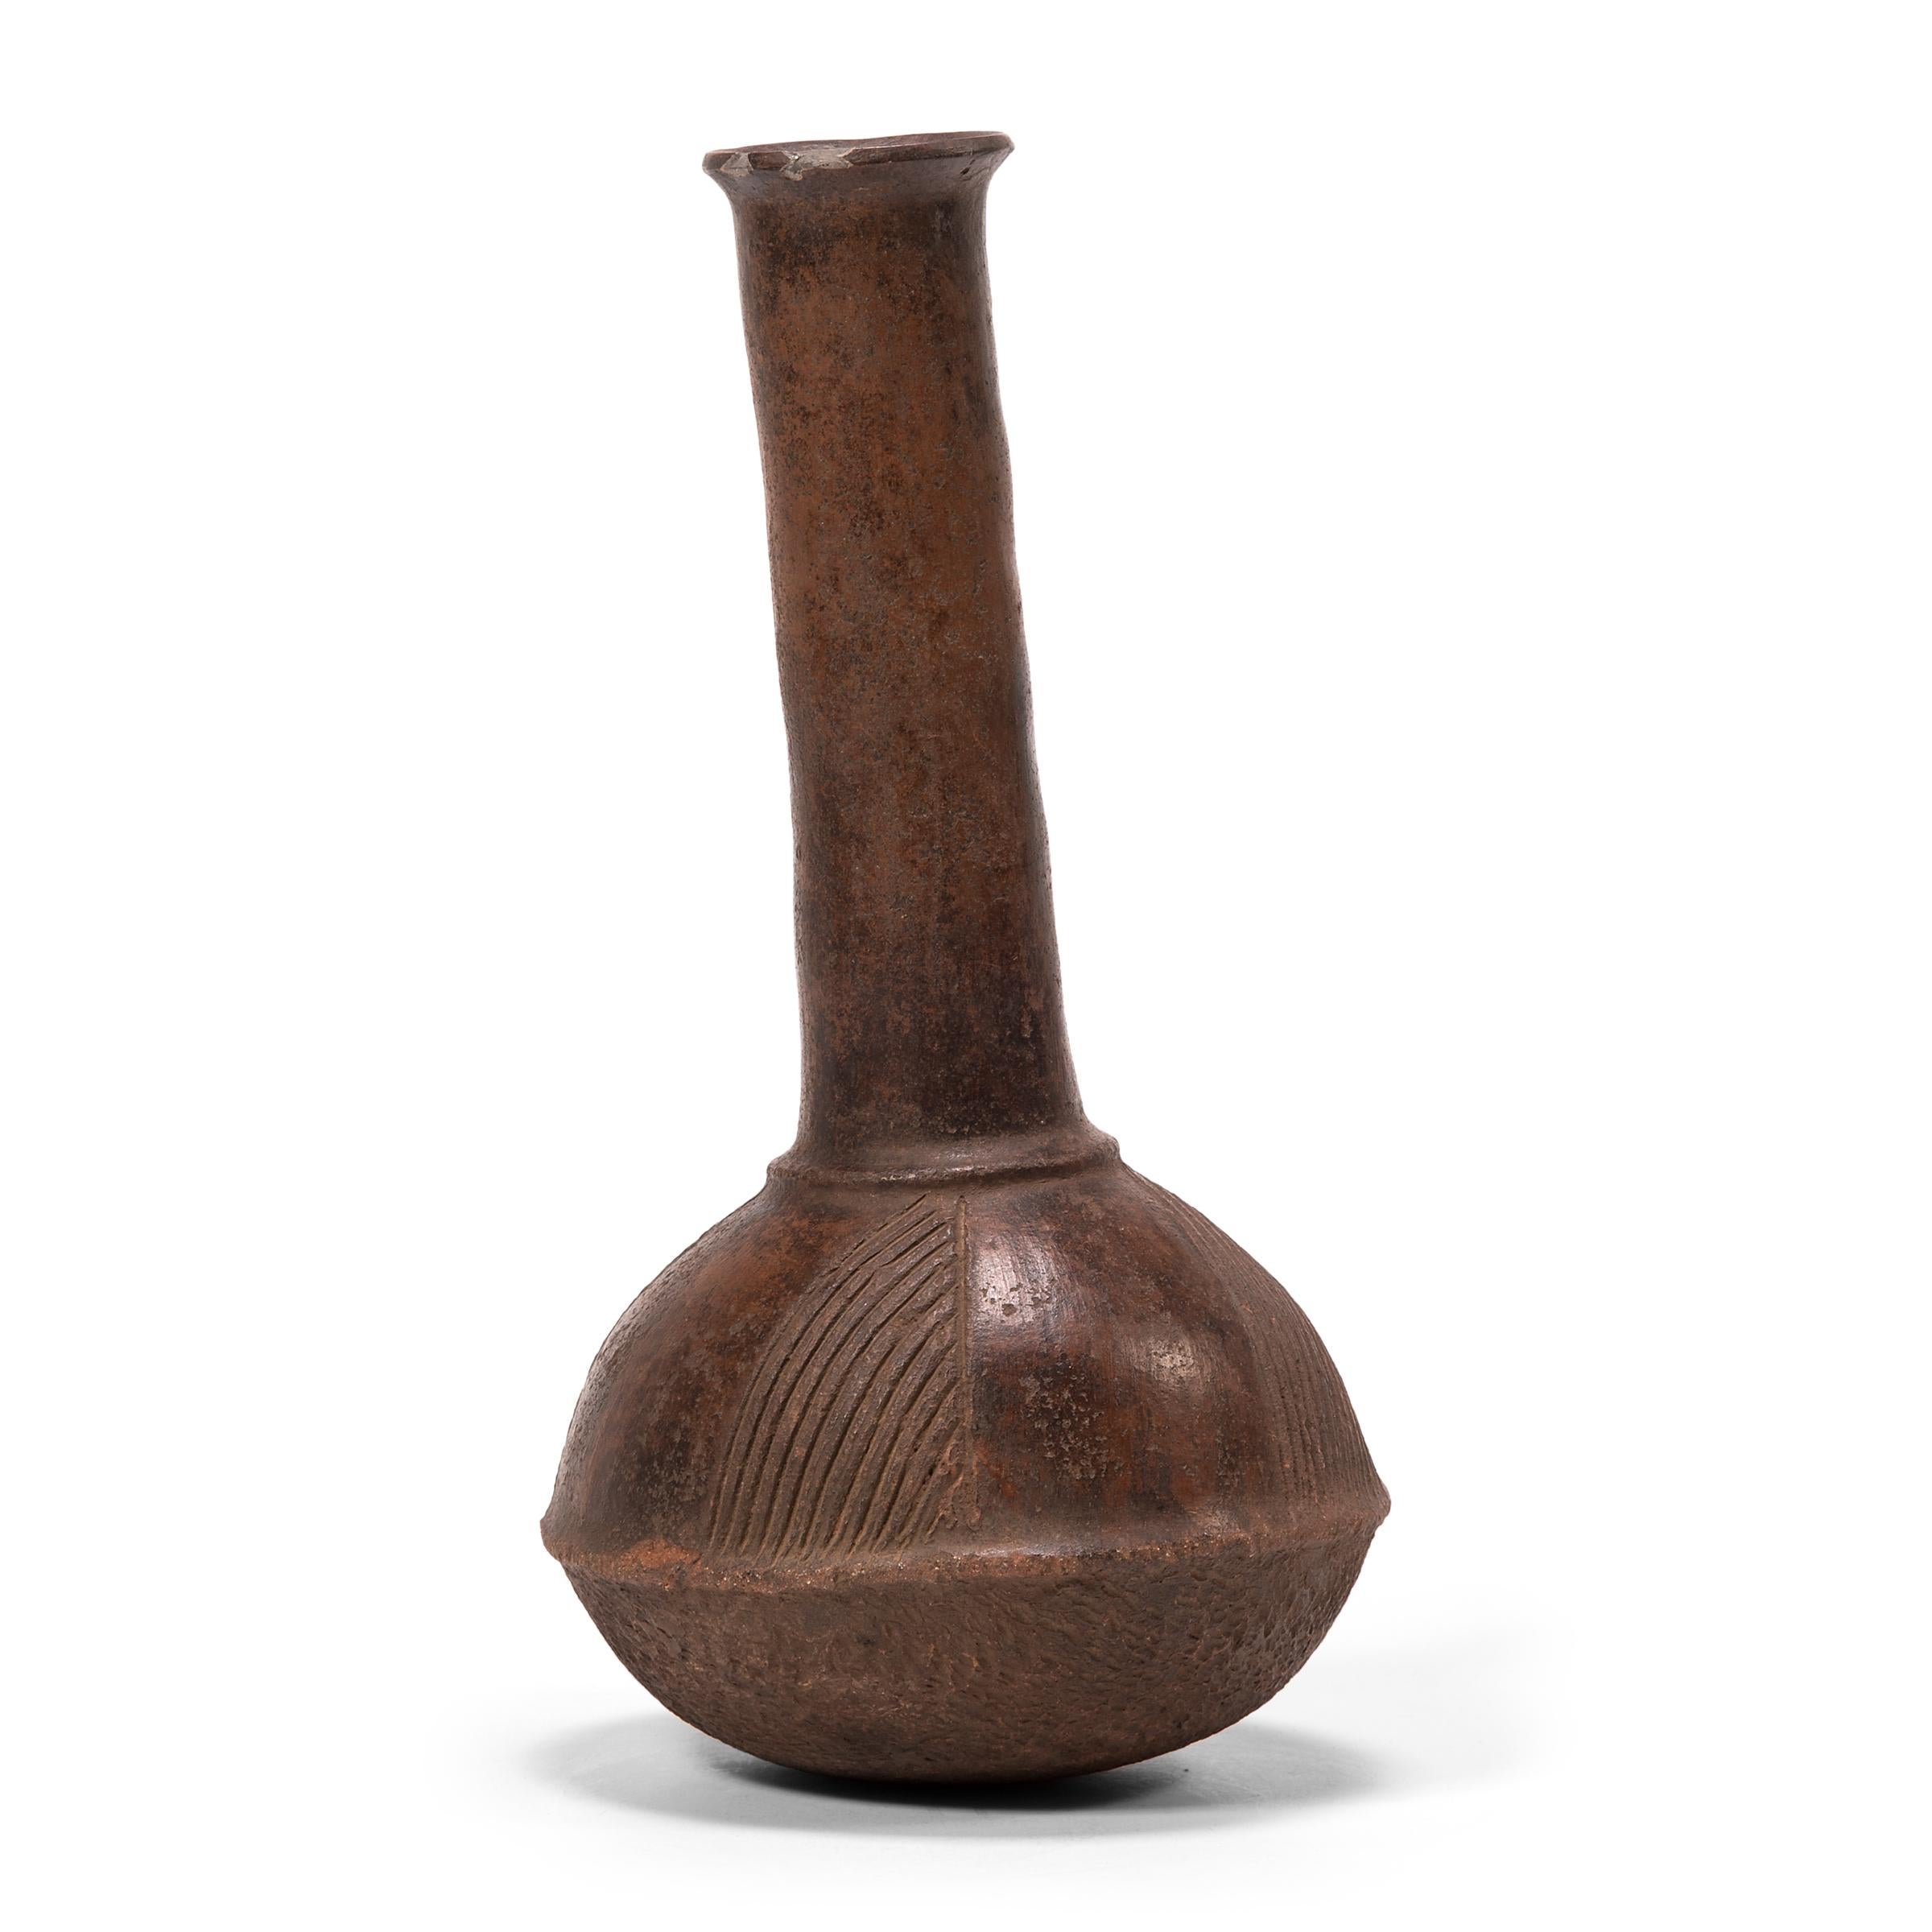 This tall, bottle-necked vase was created by an artisan of the Igbo People of Nigeria. Bottle forms, once common in pre-historic West African ceramics, are rare in the historic record. An elongated neck meets the oblong body with a slight ridge,